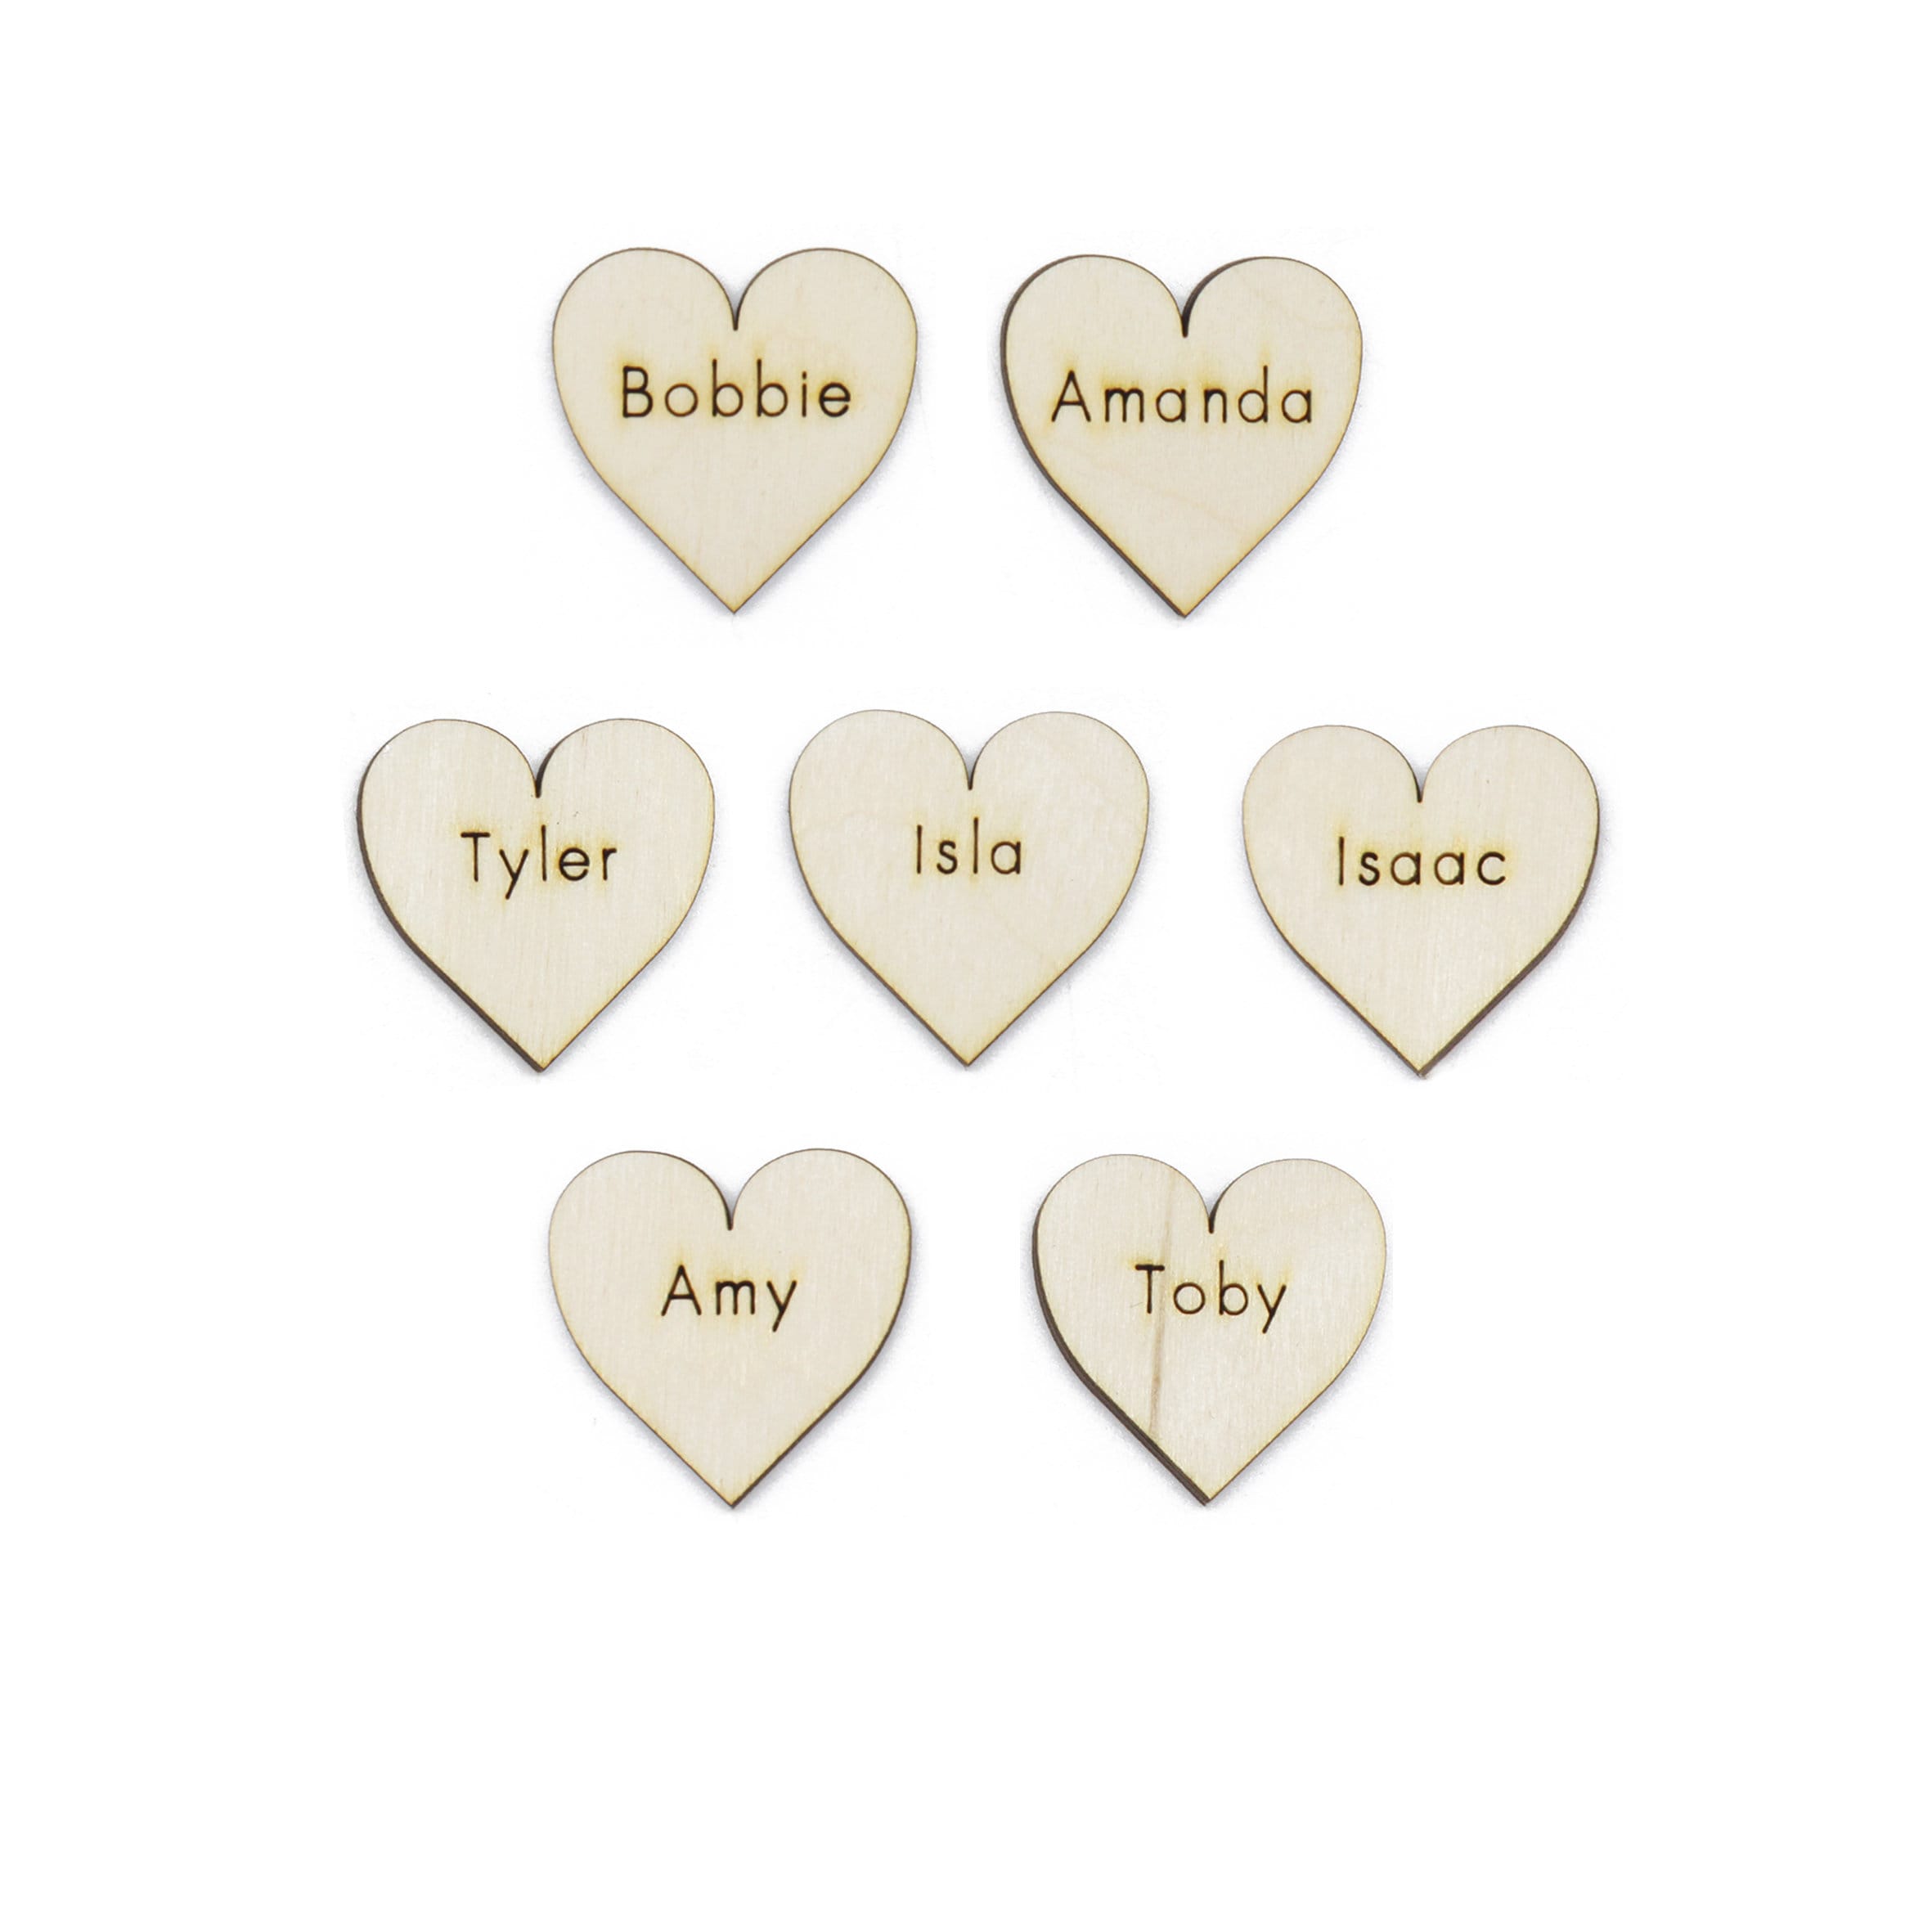 3cm Hearts Personalised With Your Names Laser Cut From 3mm Ply Wood | Scrapbooking Card Making Wedding Favours Custom Hearts